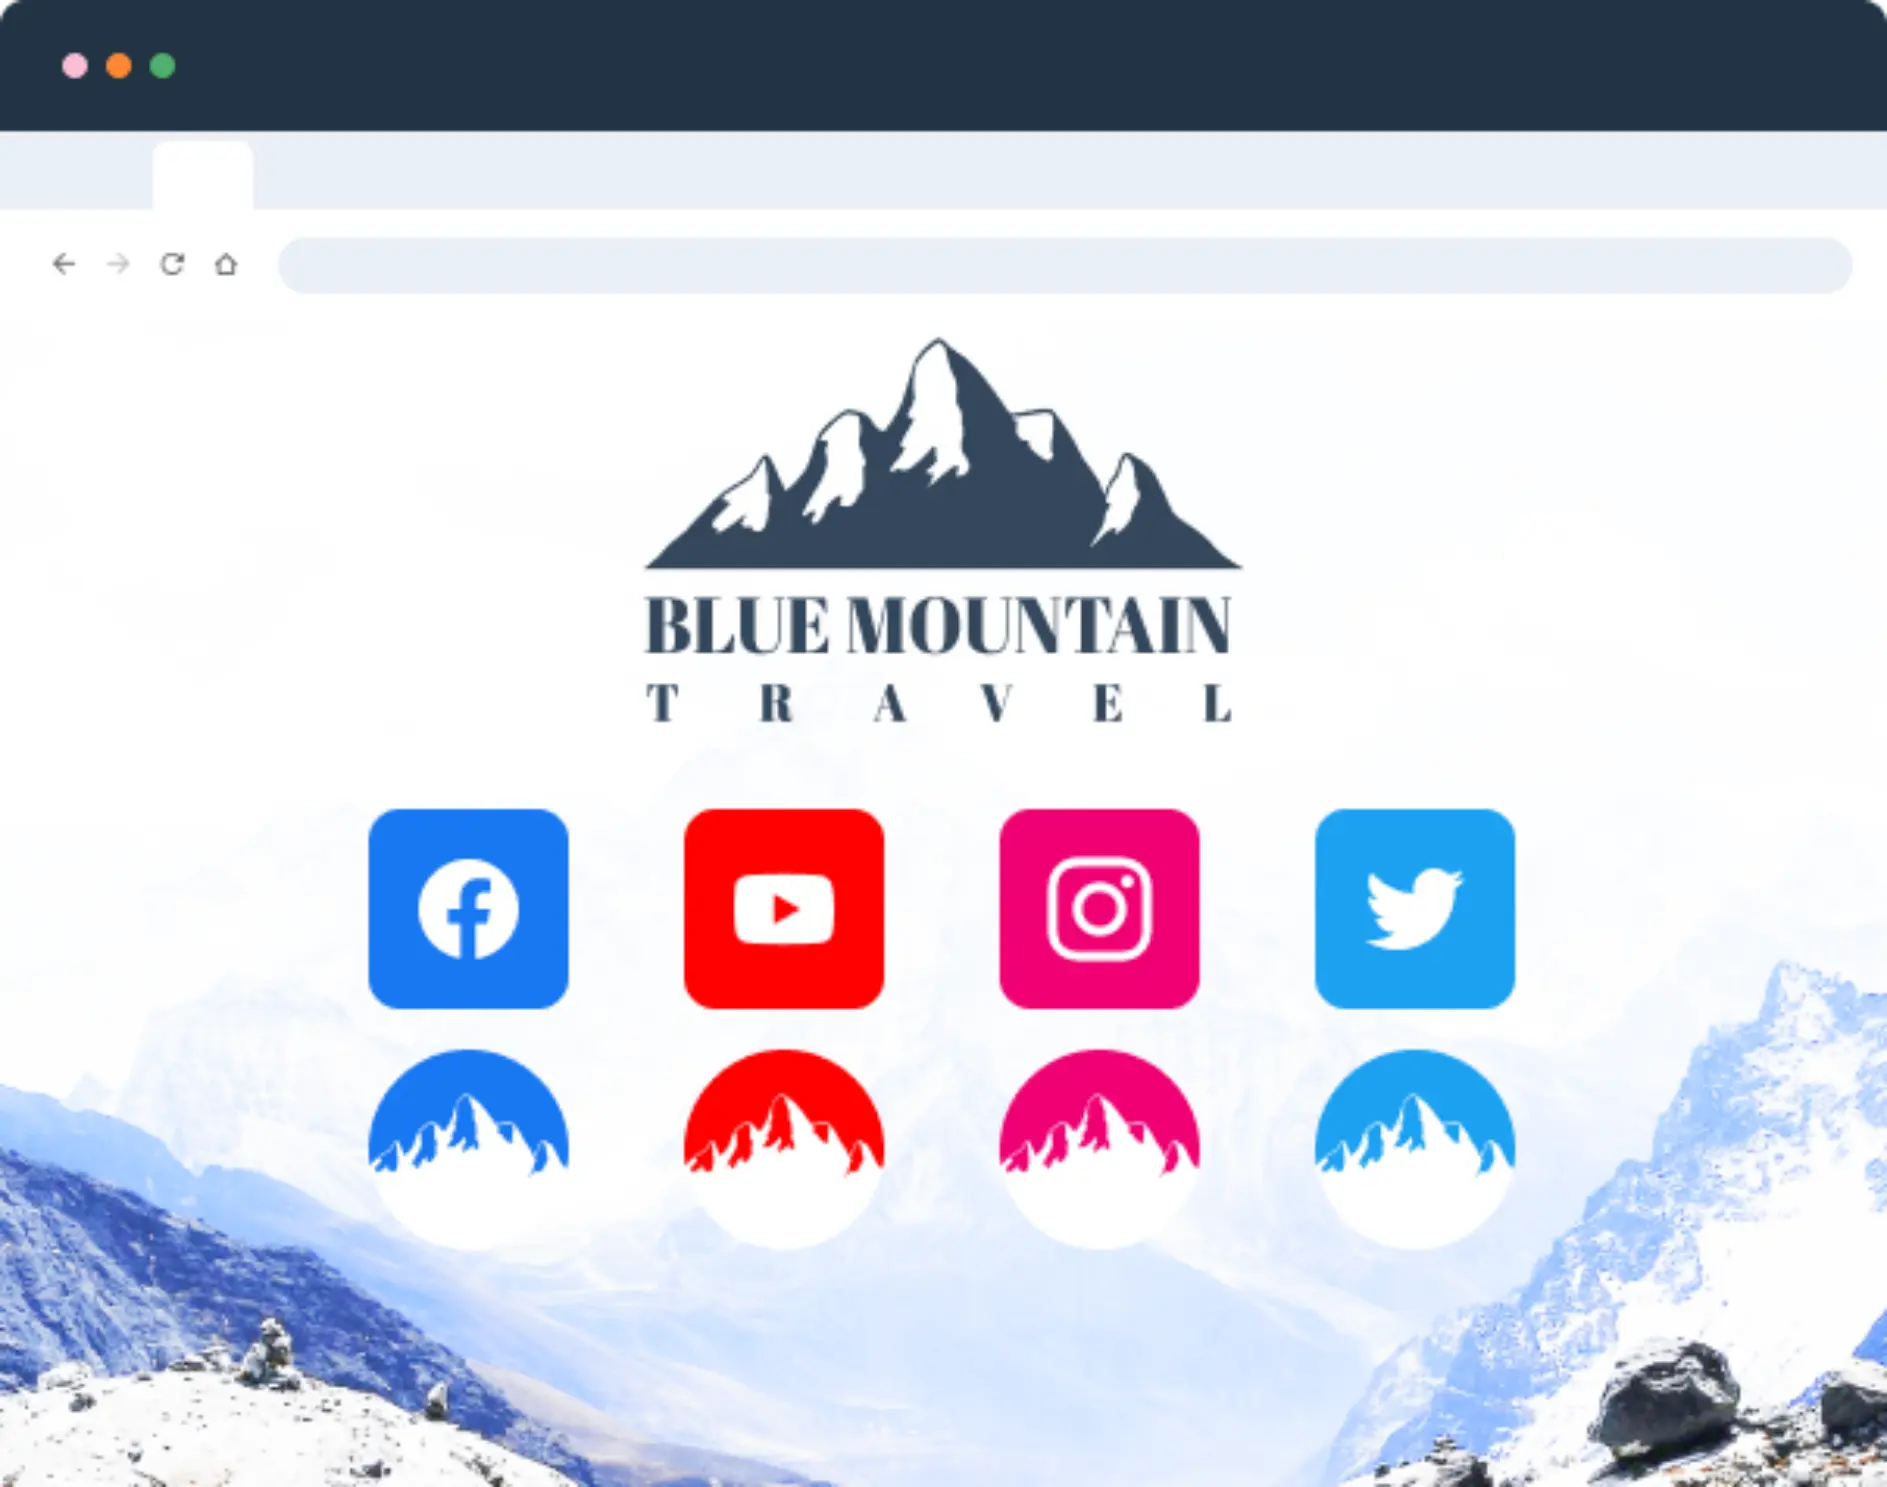 social media icons in different colors below the brand